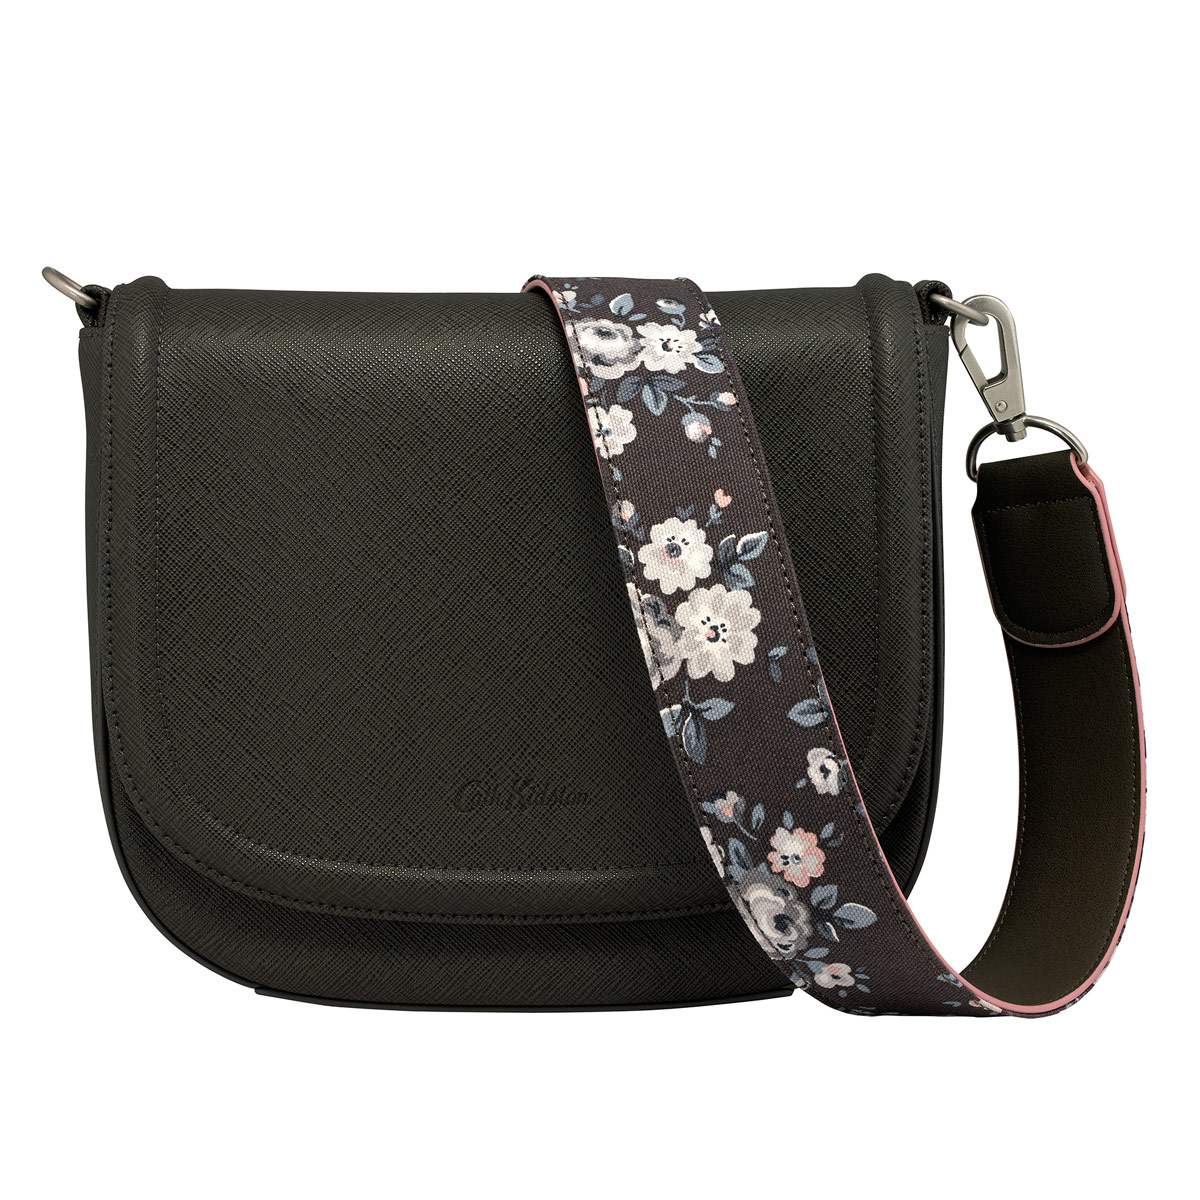 Cath Kidston Grey Saddle Bag with floral guitar strap